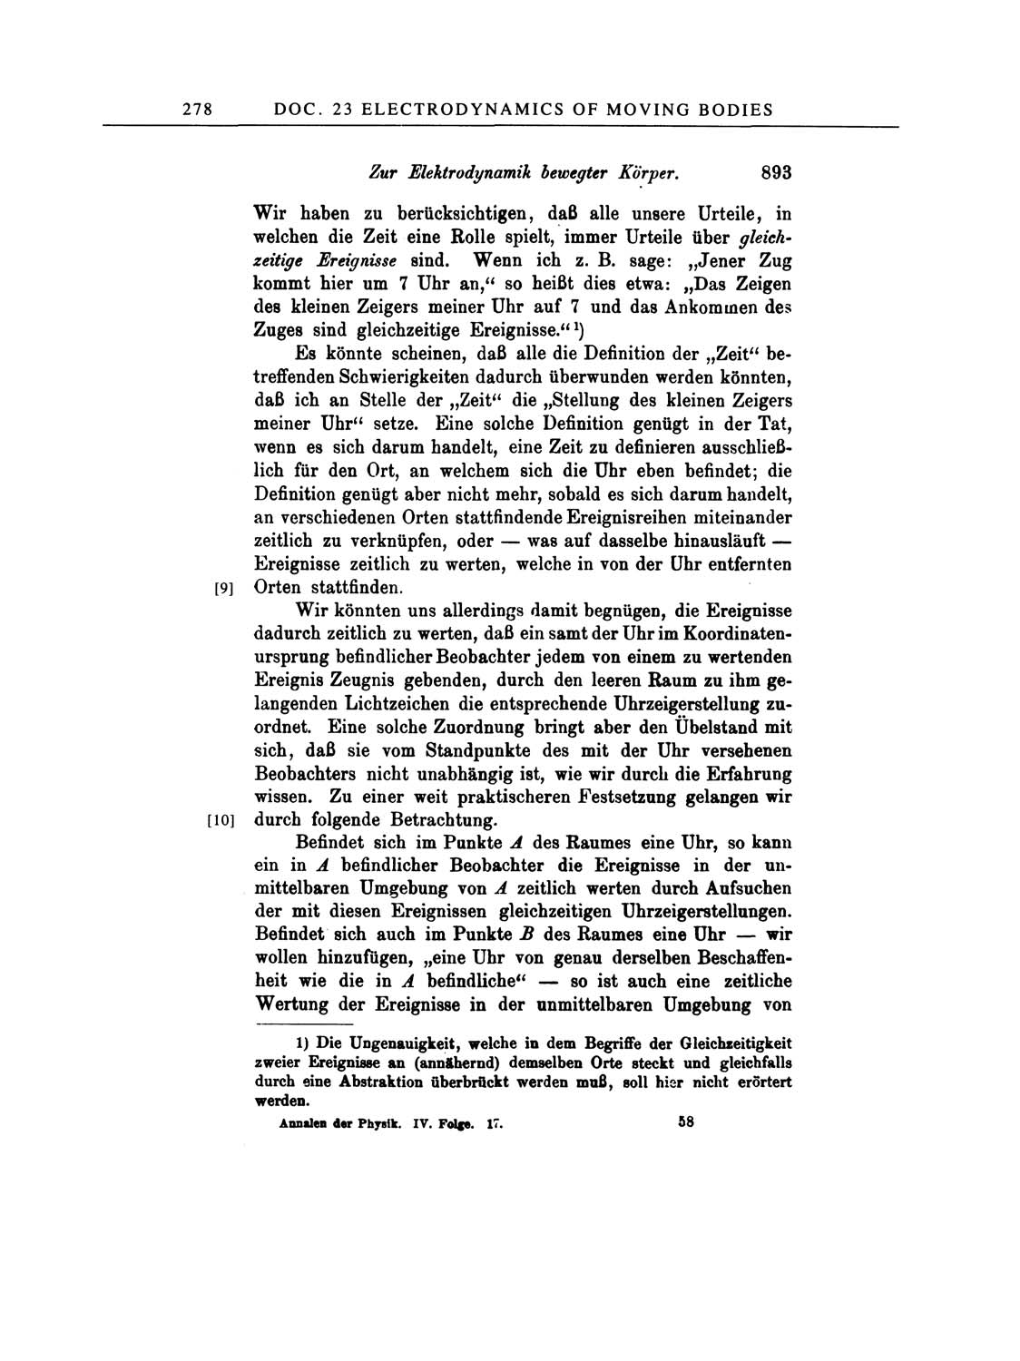 Volume 2: The Swiss Years: Writings, 1900-1909 page 278